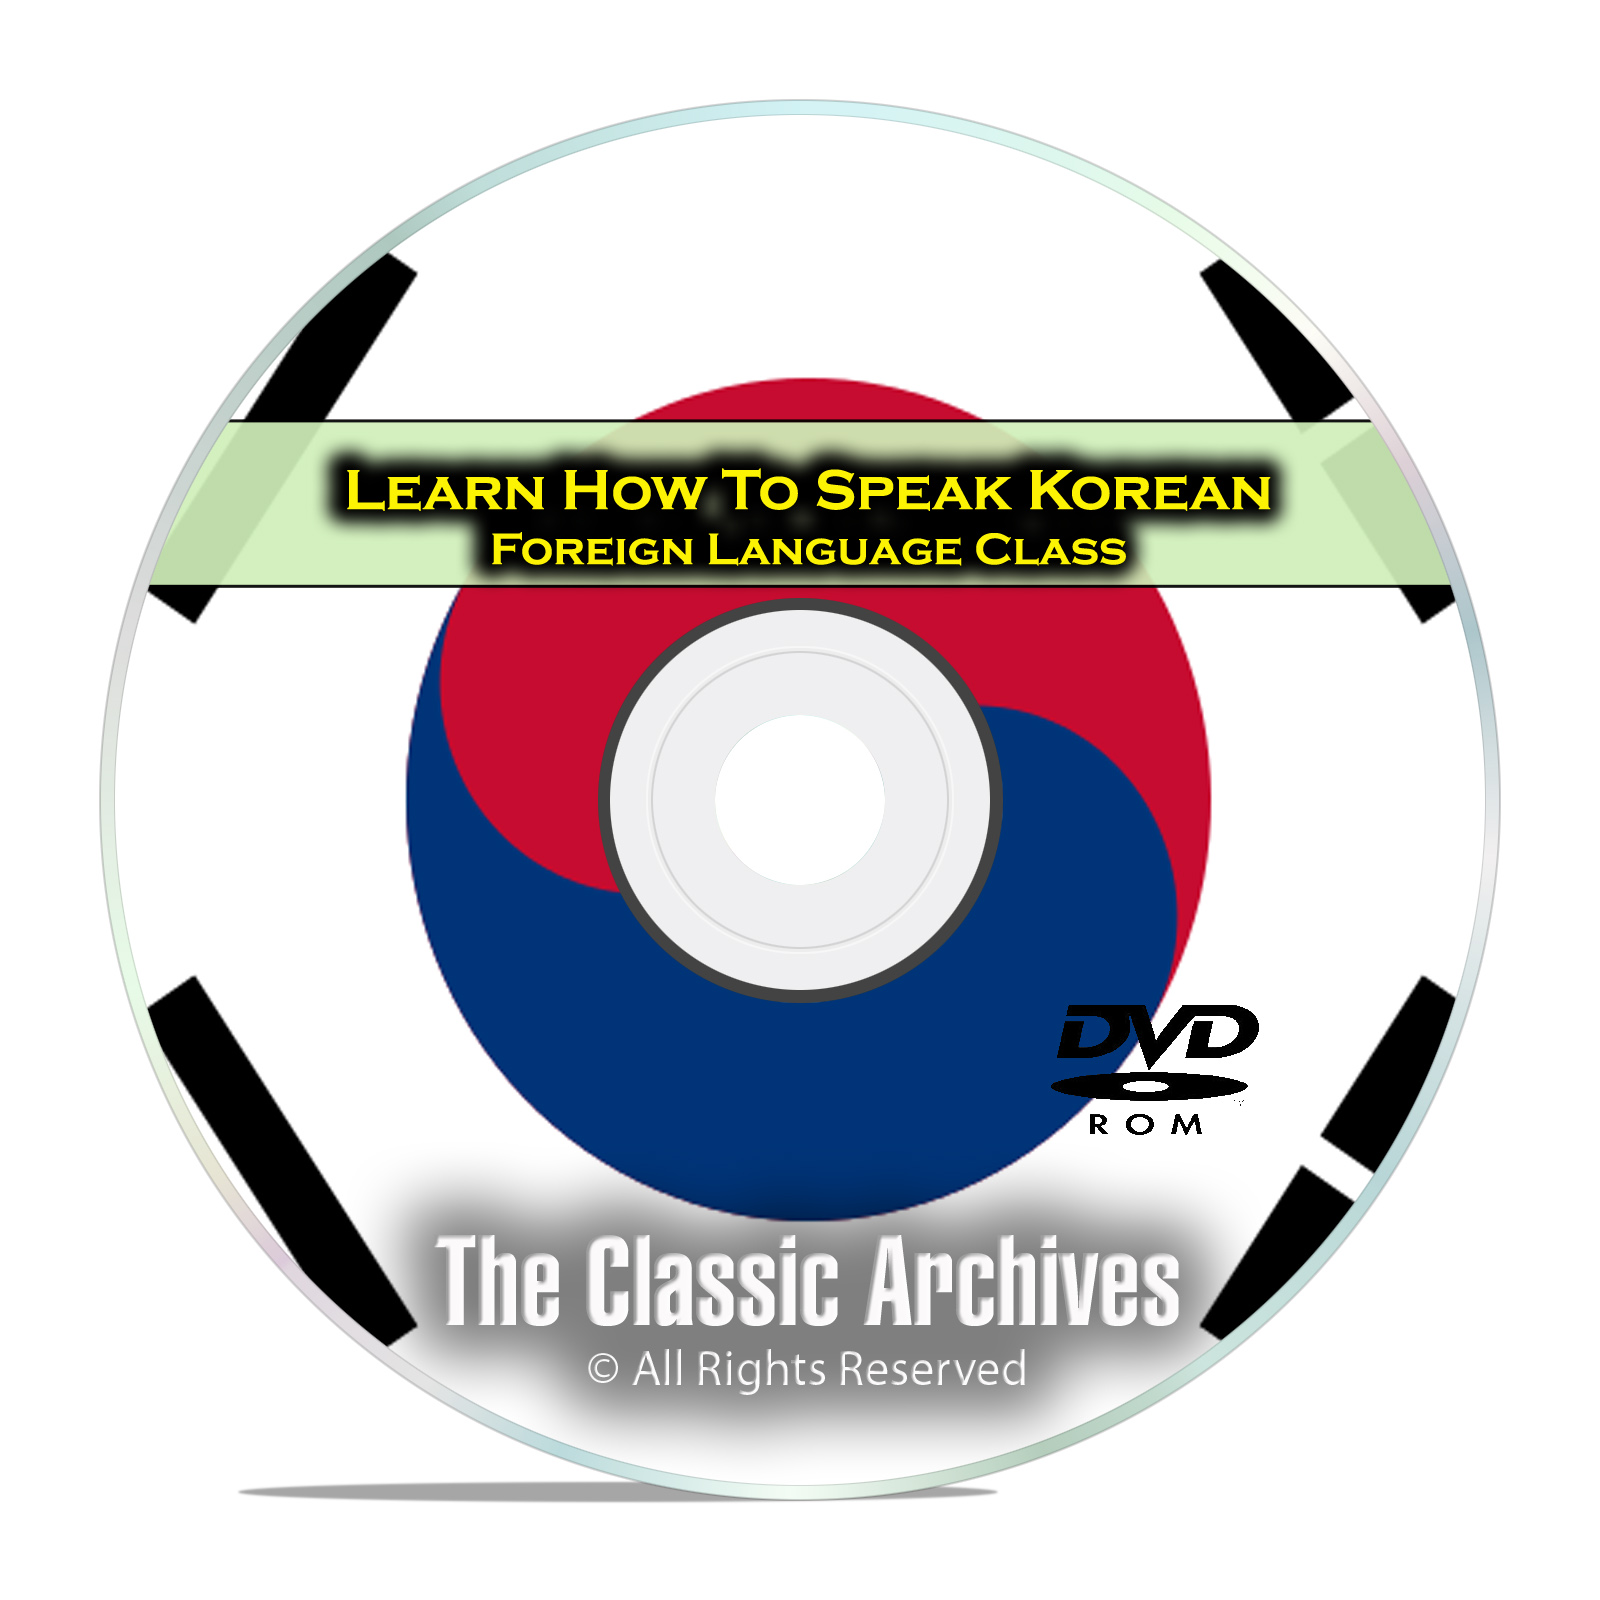 Learn How To Speak Korean, Fast & Easy Foreign Language Training Course DVD